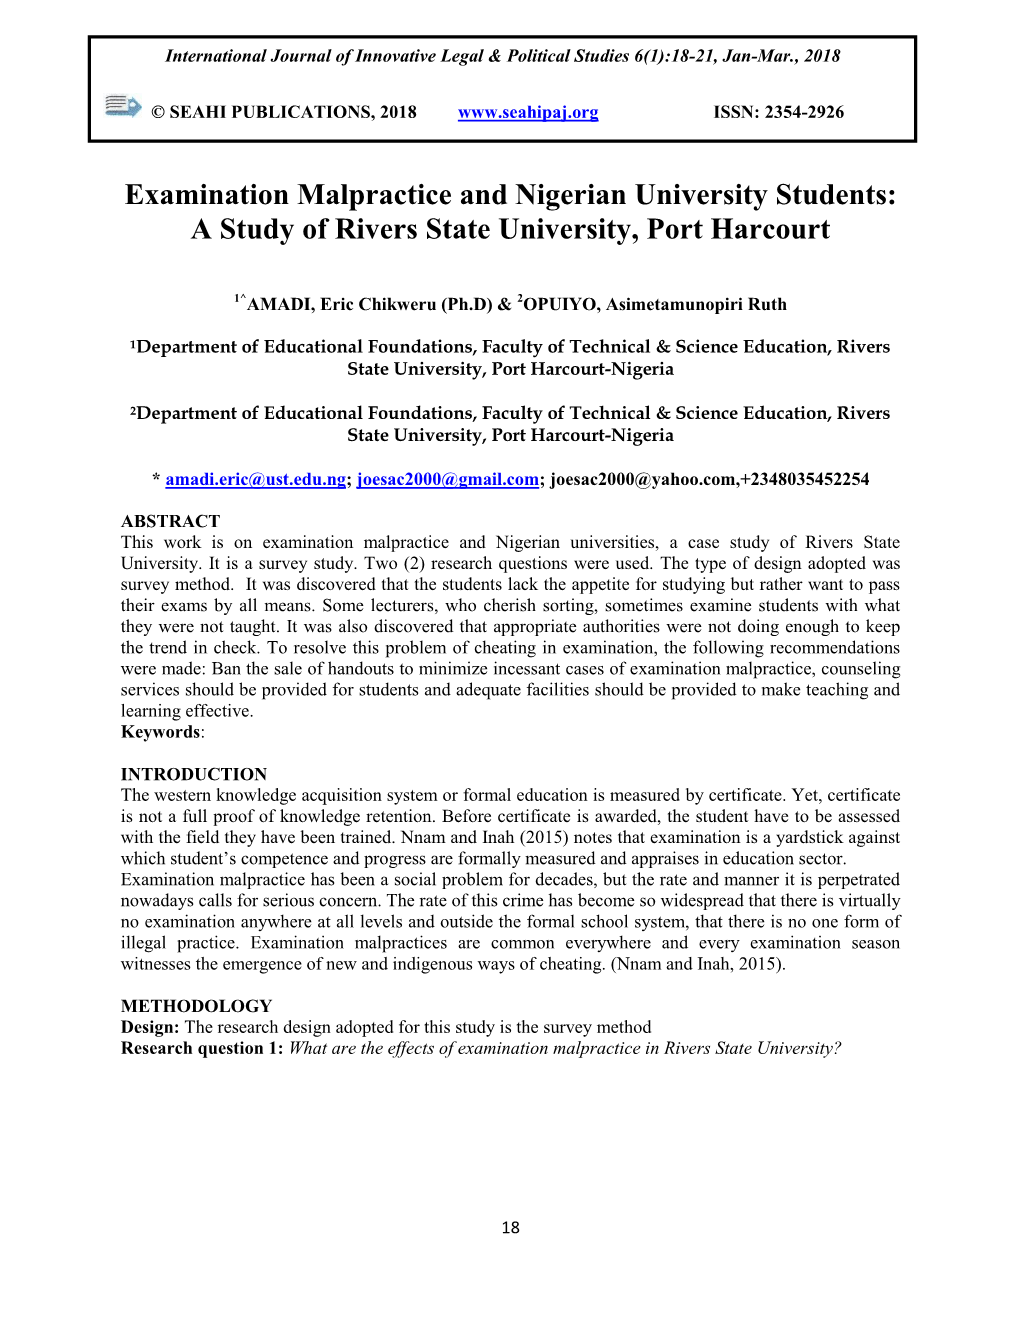 Examination Malpractice and Nigerian University Students: a Study of Rivers State University, Port Harcourt